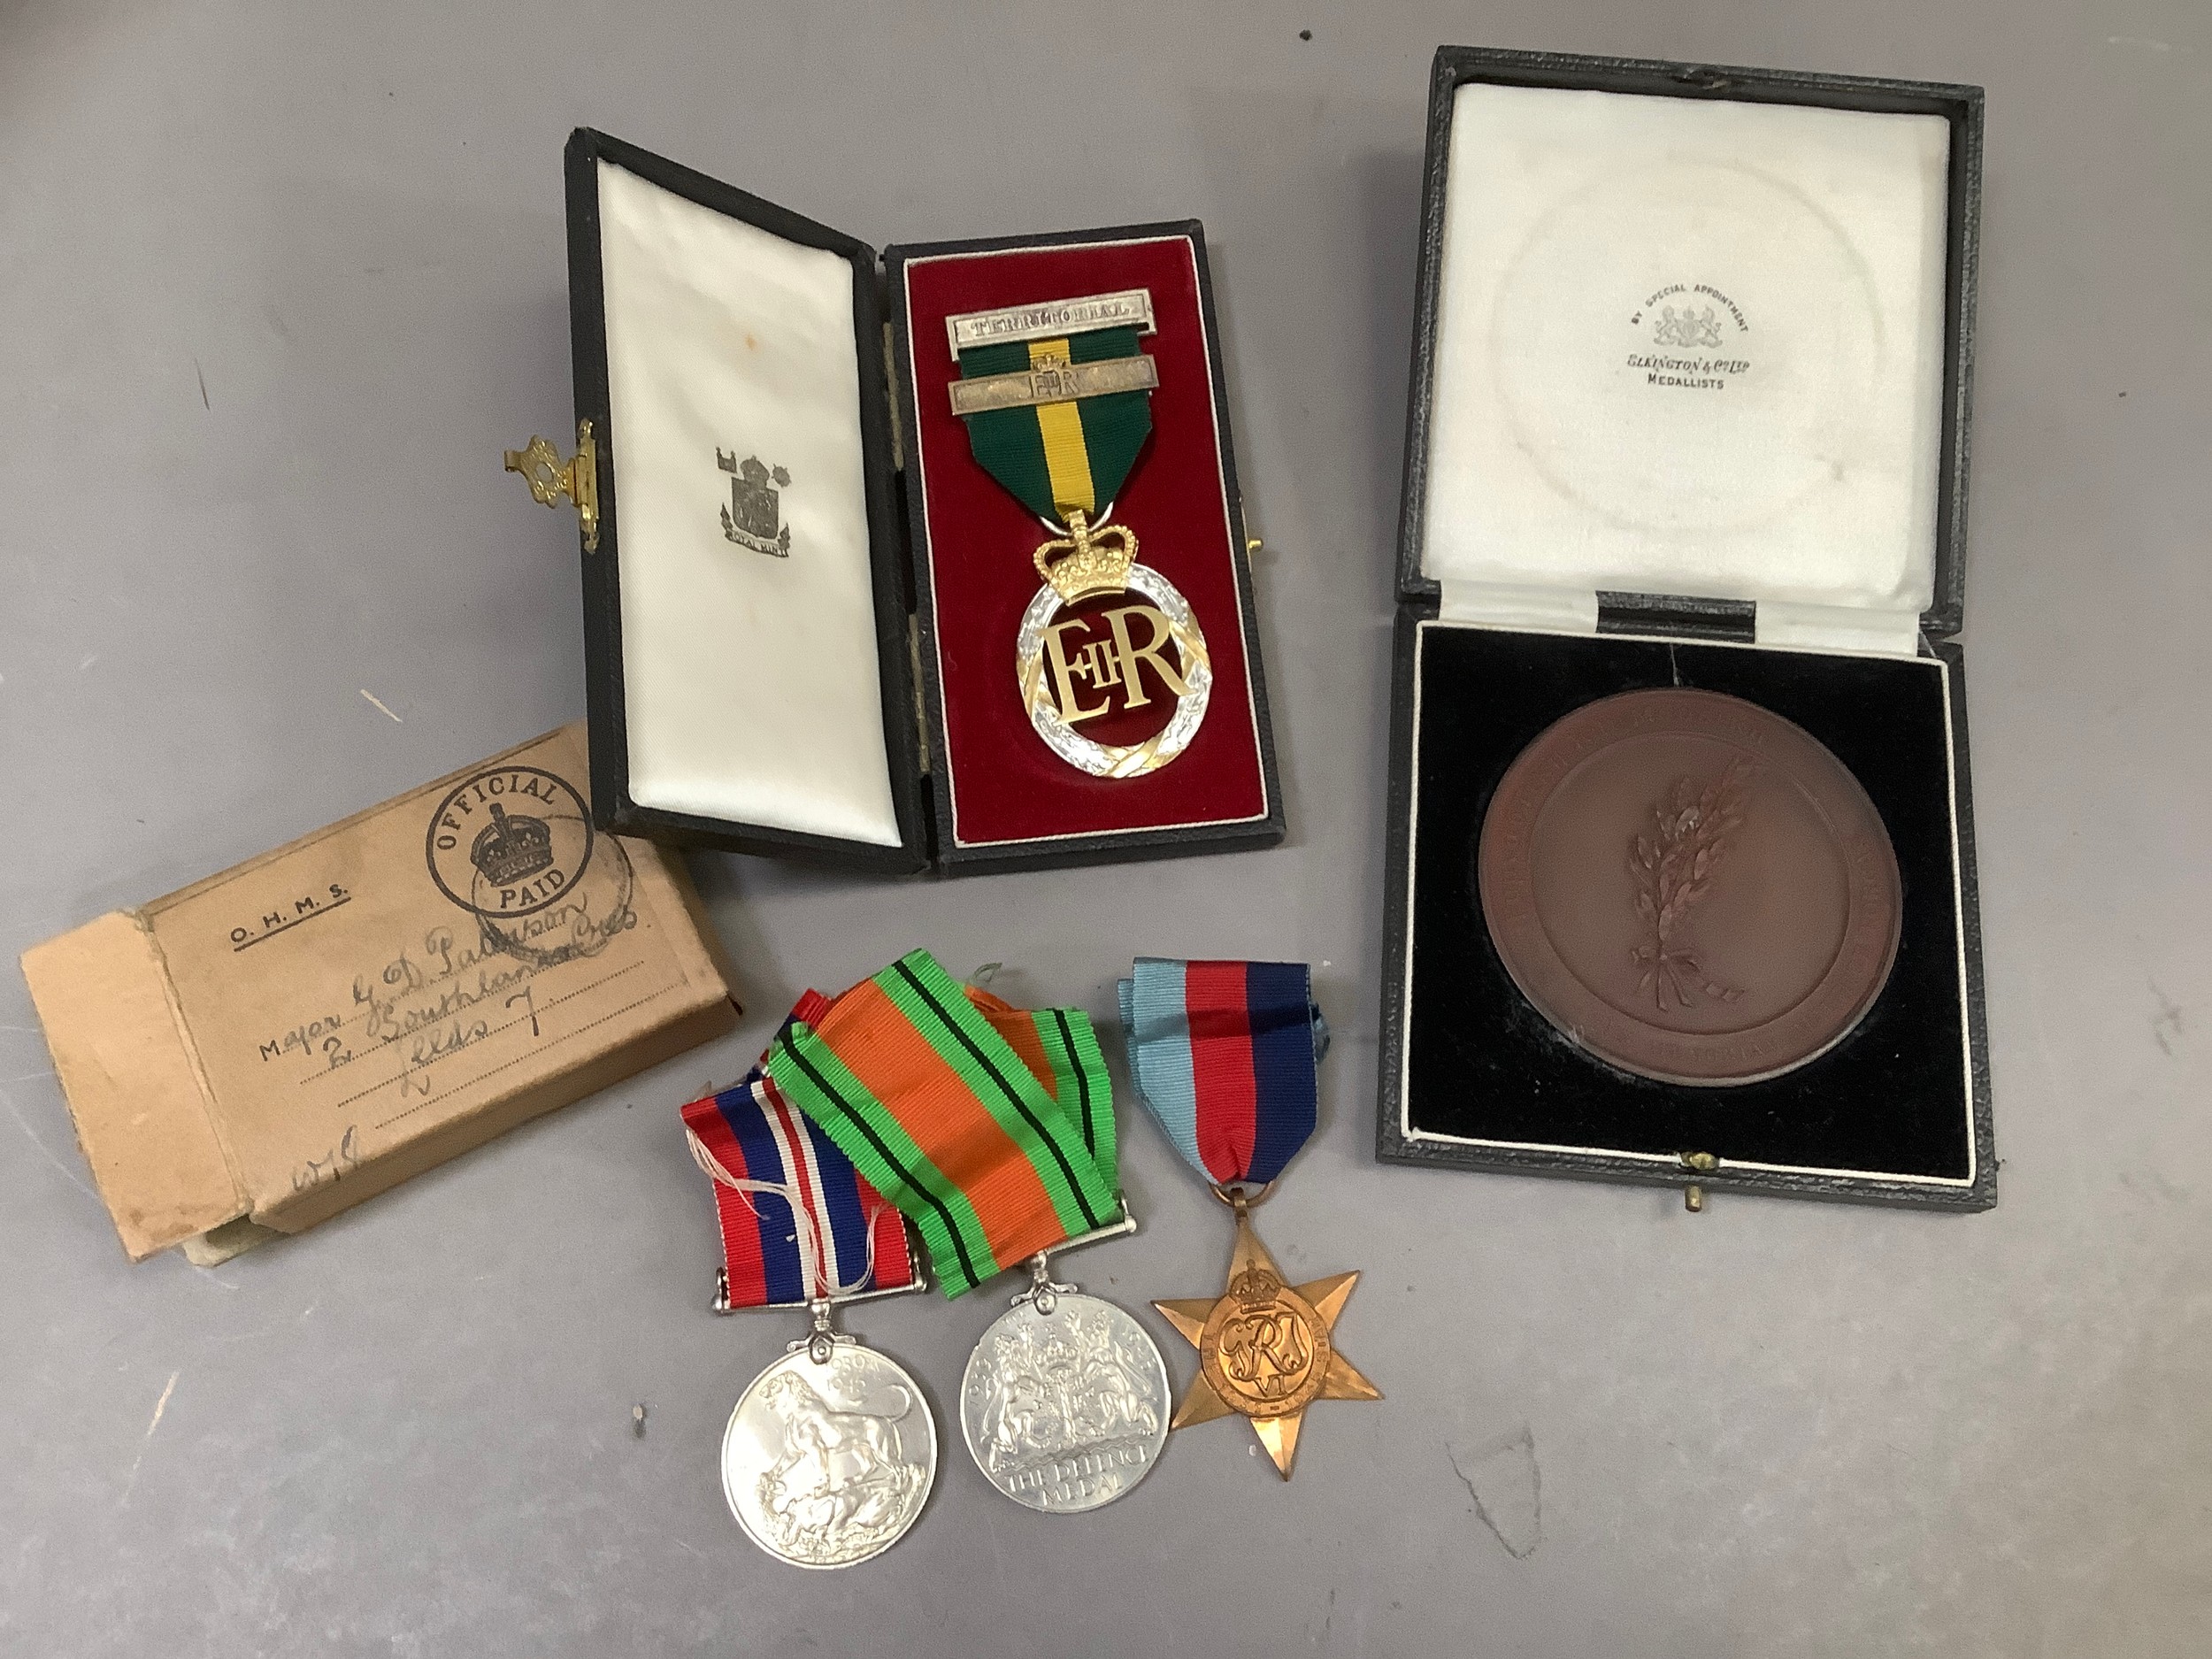 A Queen Elizabeth II Territorial medal 1952 in original box for Major G D Paterson together with